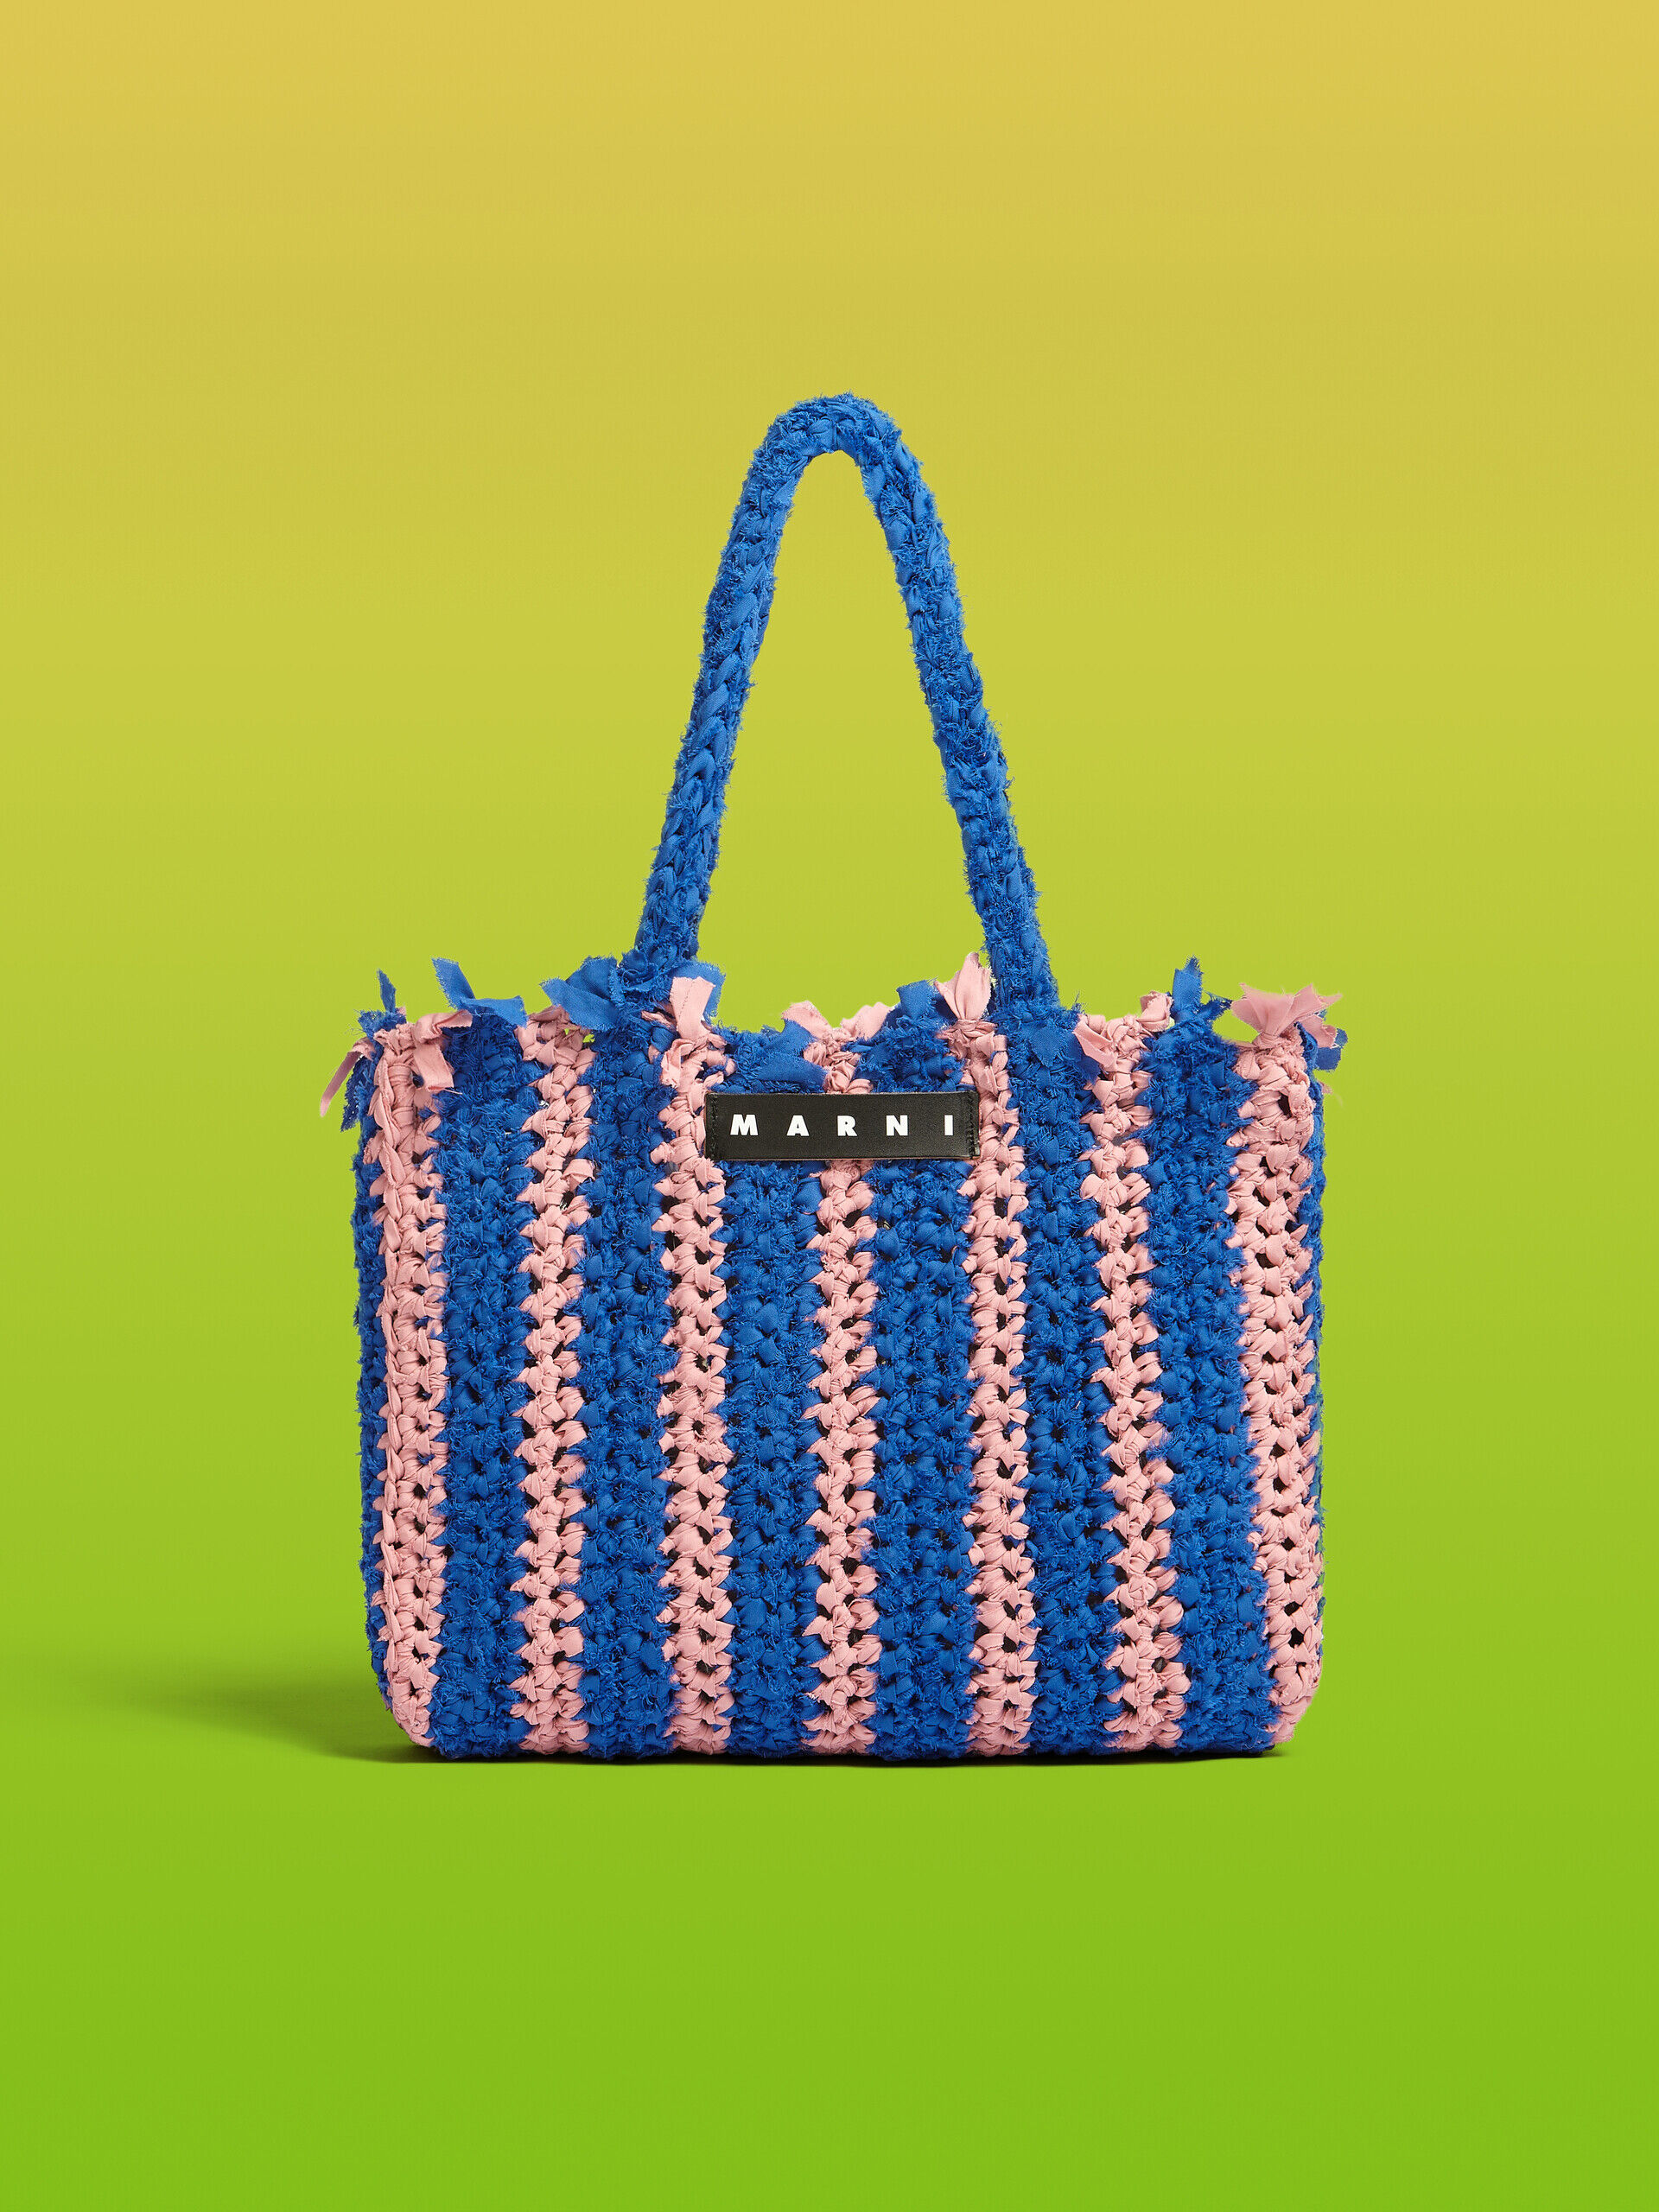 MARNI MARKET JERSEY bag in pink and blue cotton | Marni